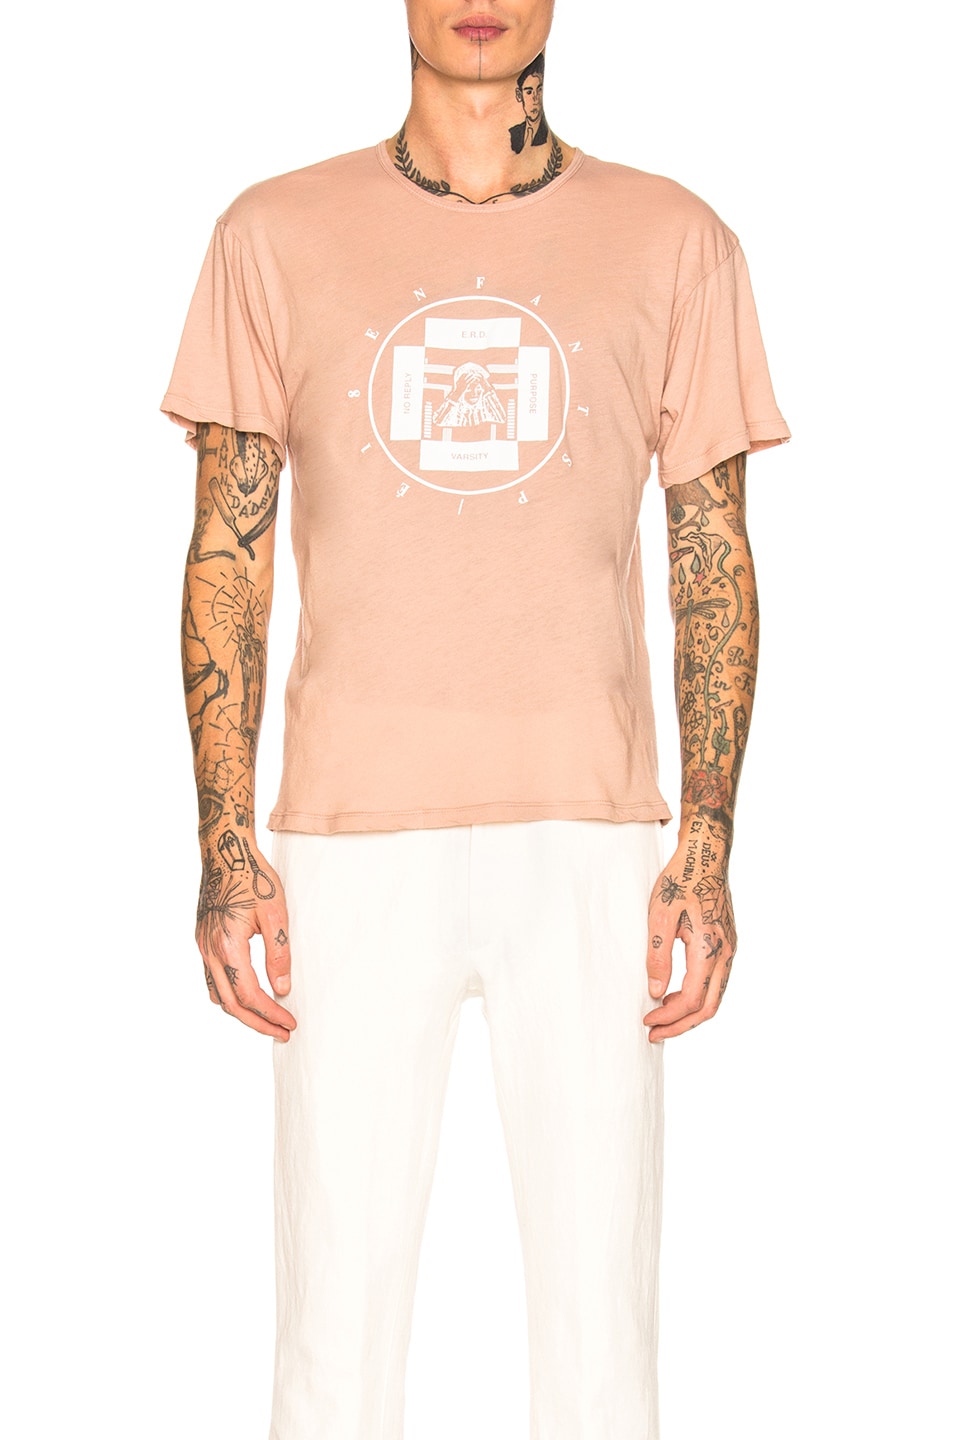 Image 1 of Enfants Riches Deprimes Boy With Headache Tee in Pink & White